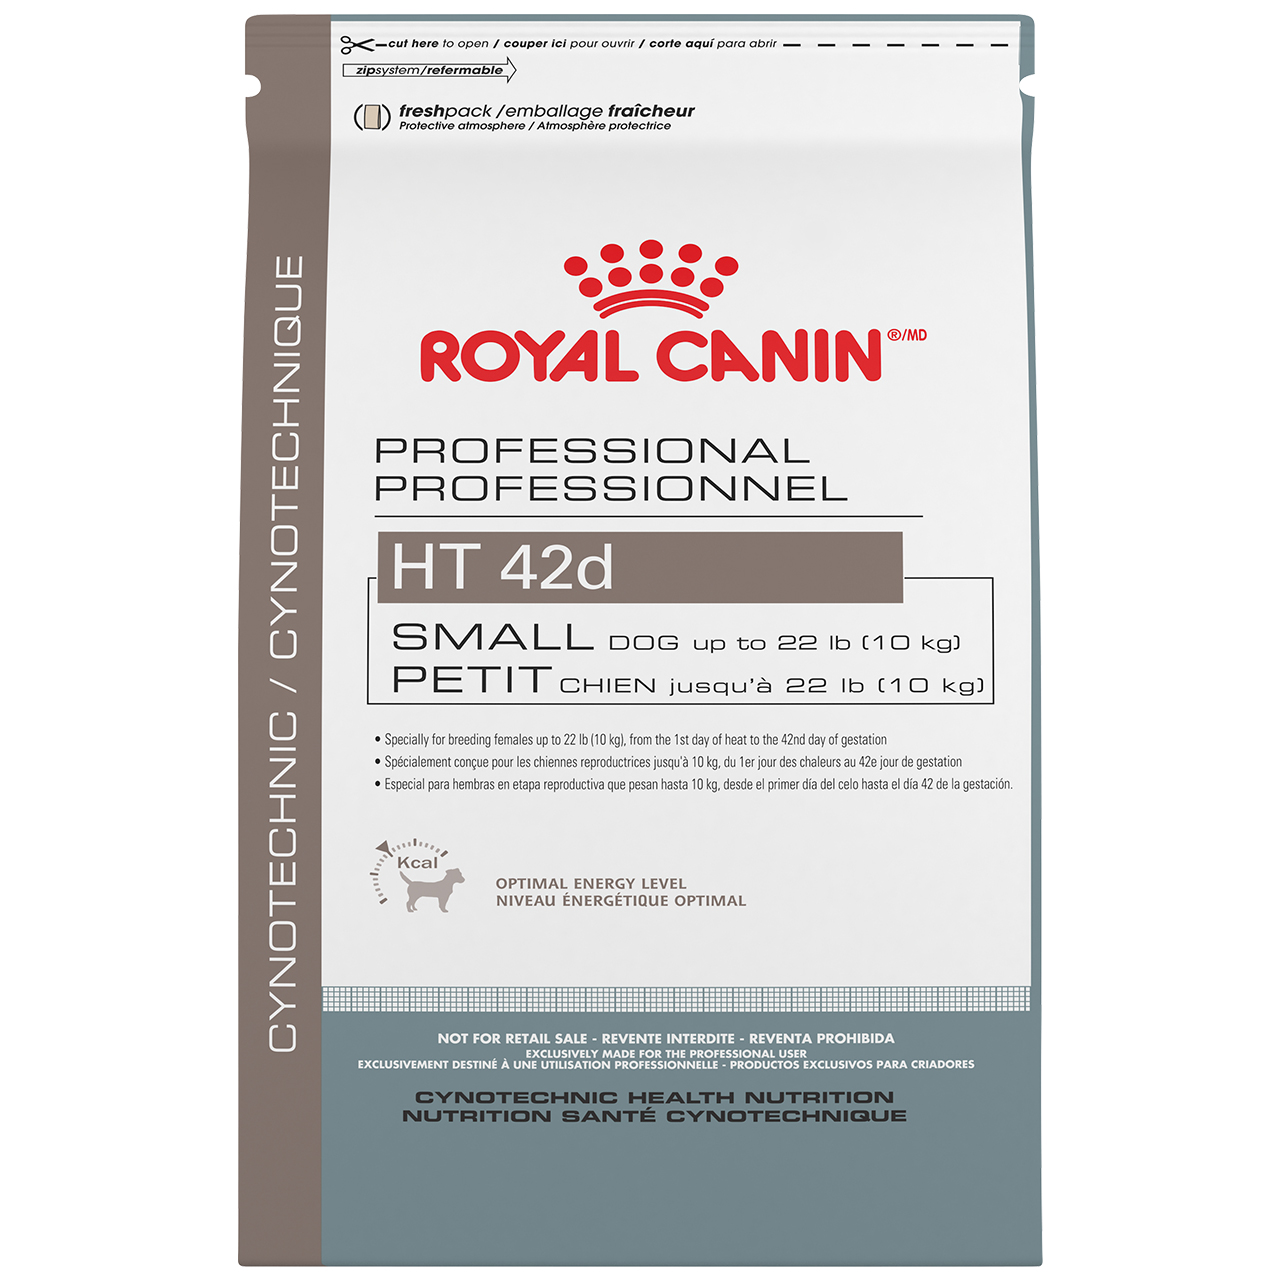 PRO 42Ht D Small Dog Dry Dog Food 